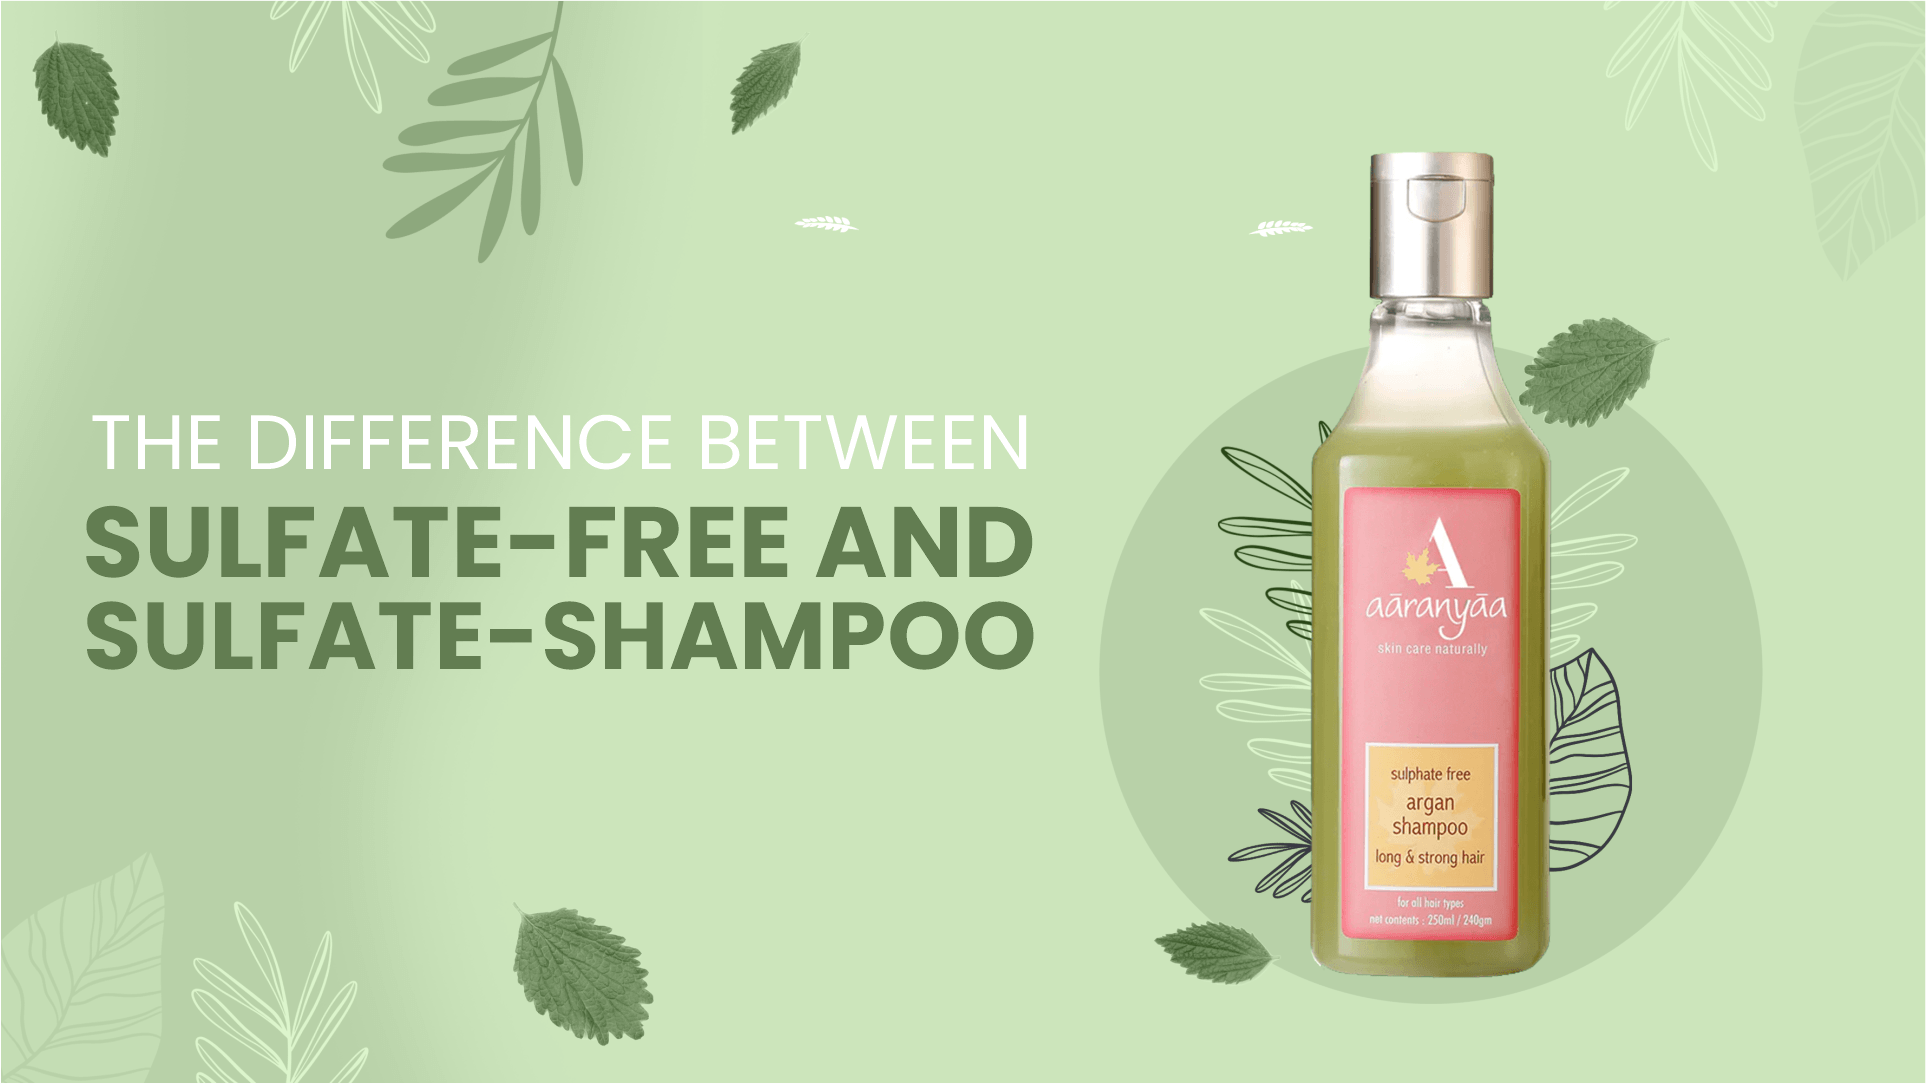 The Difference Between Sulfate-Free And Sulfate Shampoo - aaranyaa skincare